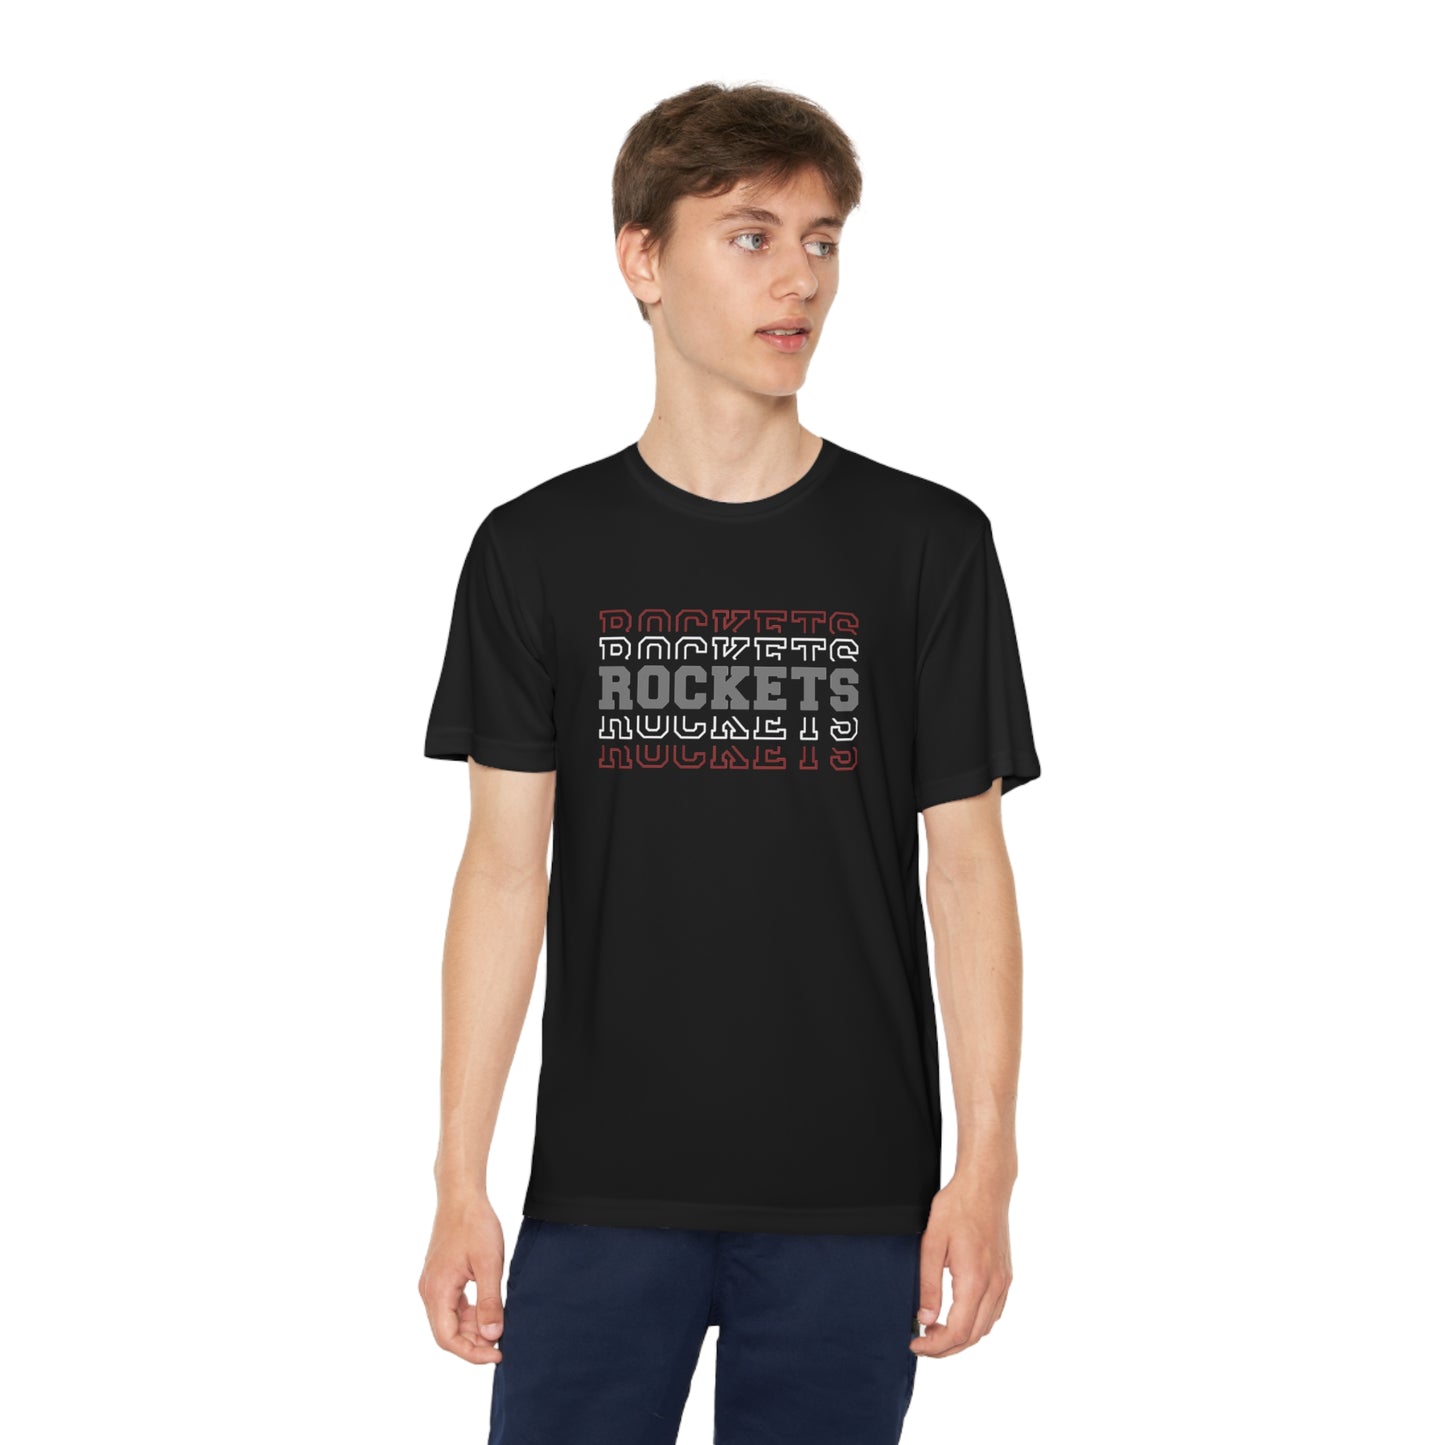 Rockets - Youth Competitor Tee